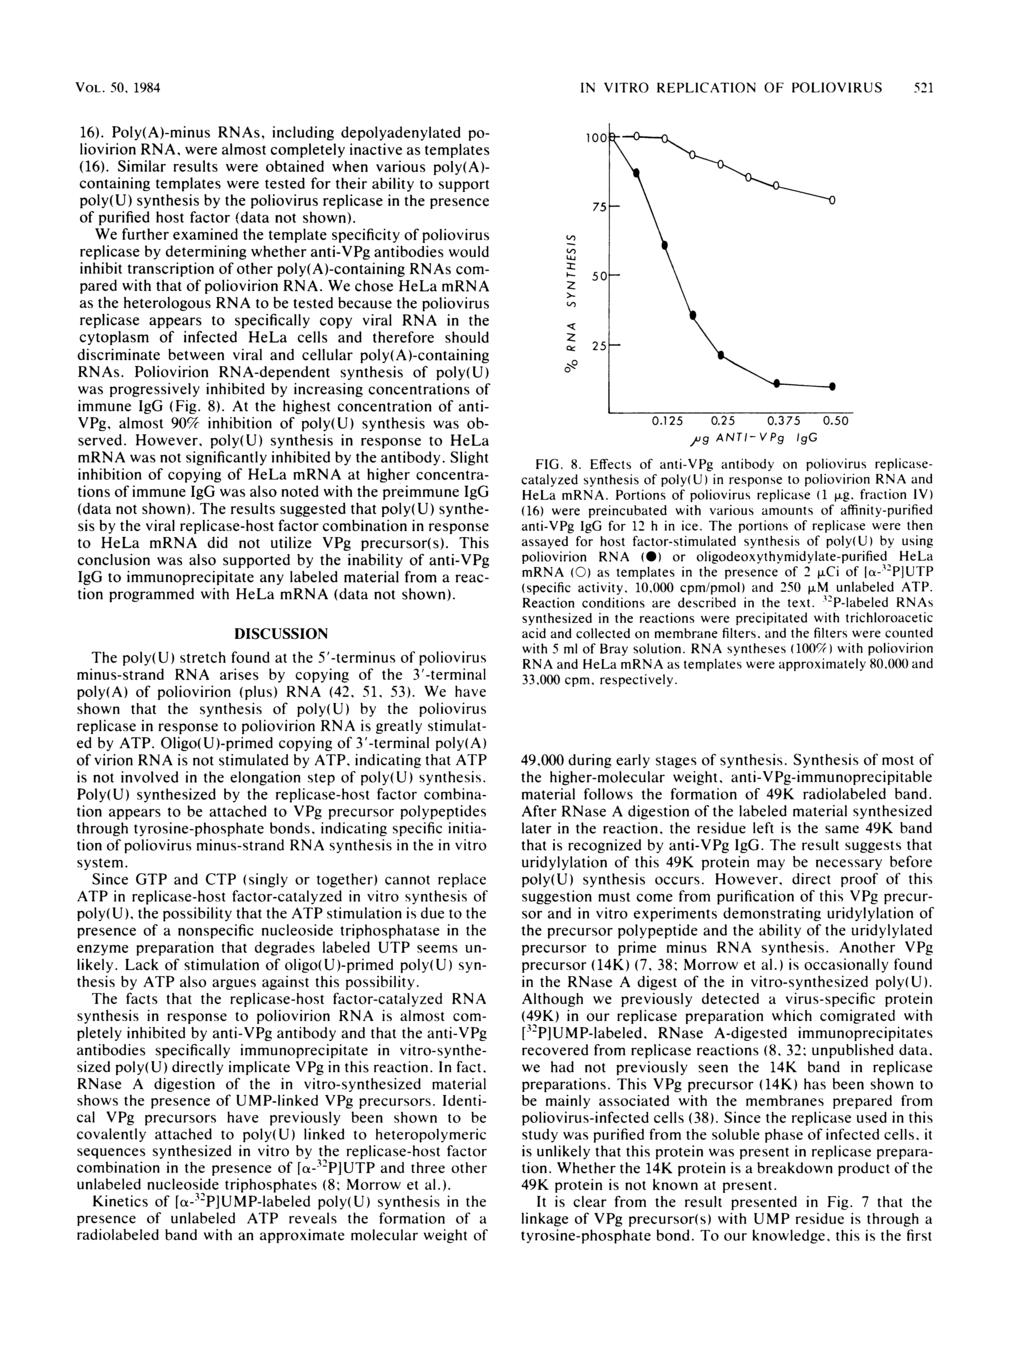 VOL. 5, 1984 16). Poly(A)-minus RNAs, including depolyadenylated poliovirion RNA, were almost completely inactive as templates (16).